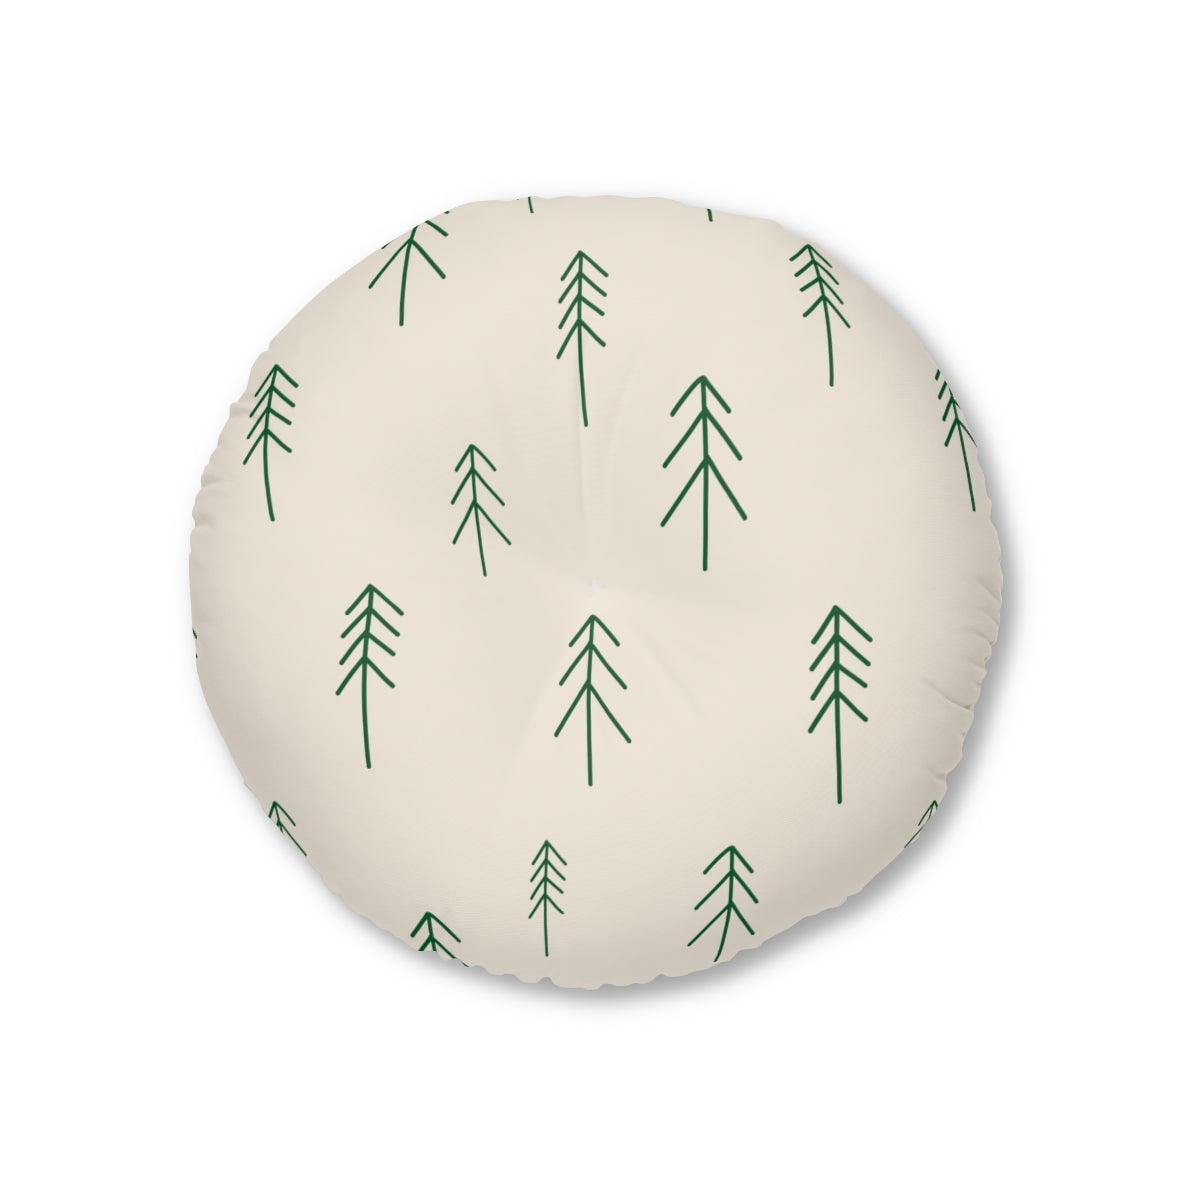 Lifestyle Details - Beige Round Tufted Holiday Floor Pillow - Evergreen Trees - 26x26 - Front View